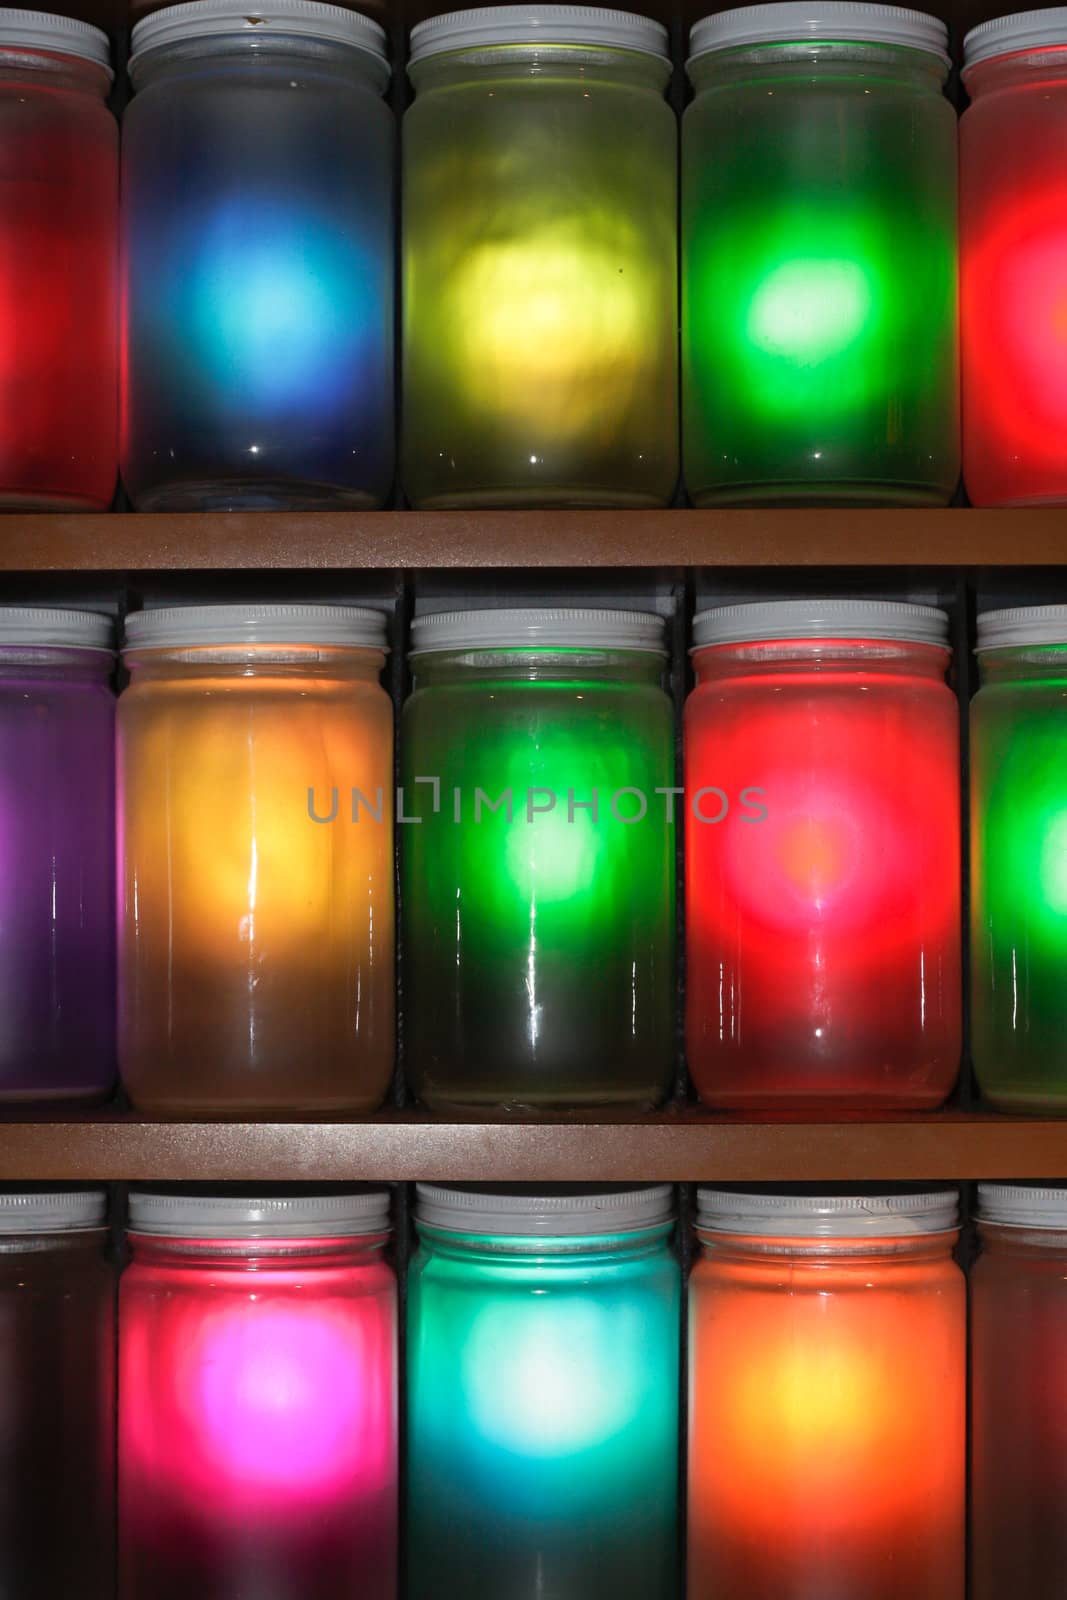 Selection of jars with multicolored light shining through them